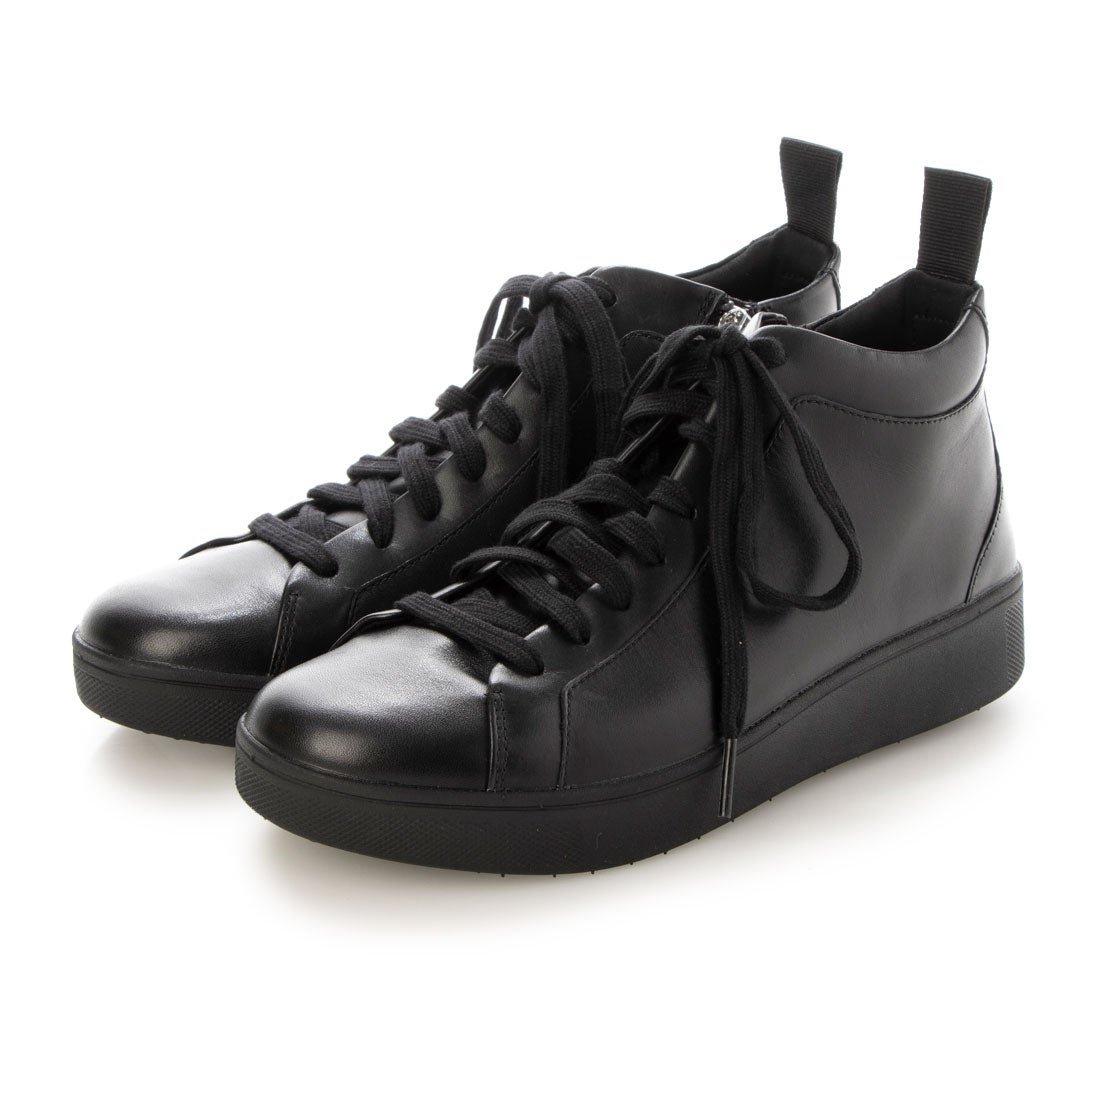 RALLY LEATHER HIGH-TOP SNEAKERS （All Black） -fitflop公式オンラインストア